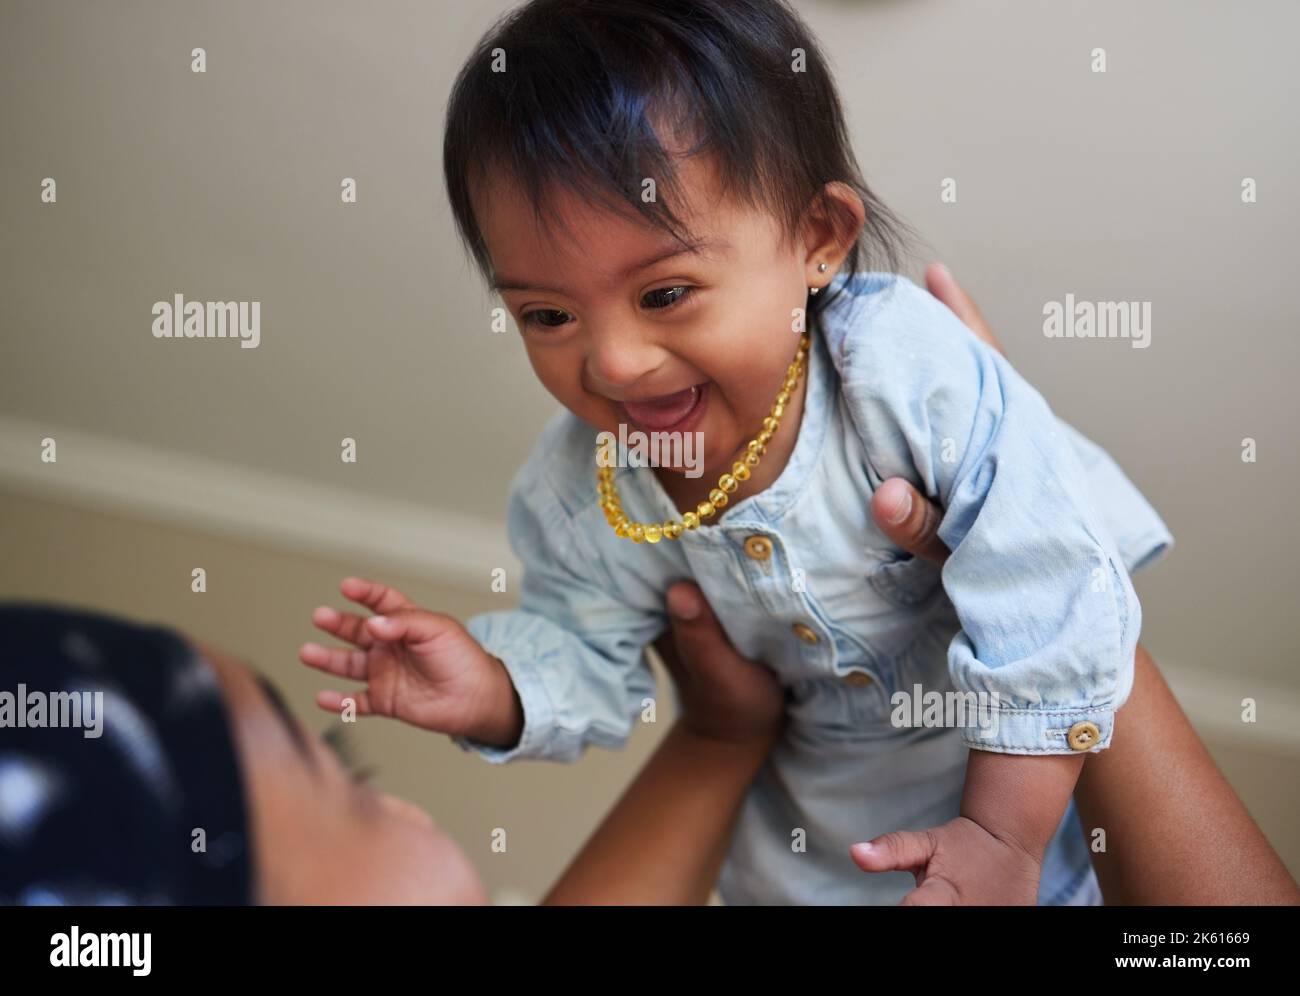 Children, down syndrome and fun with a girl and mother playing together in their home. Family, kids and disability with an adorable or cute daughter Stock Photo